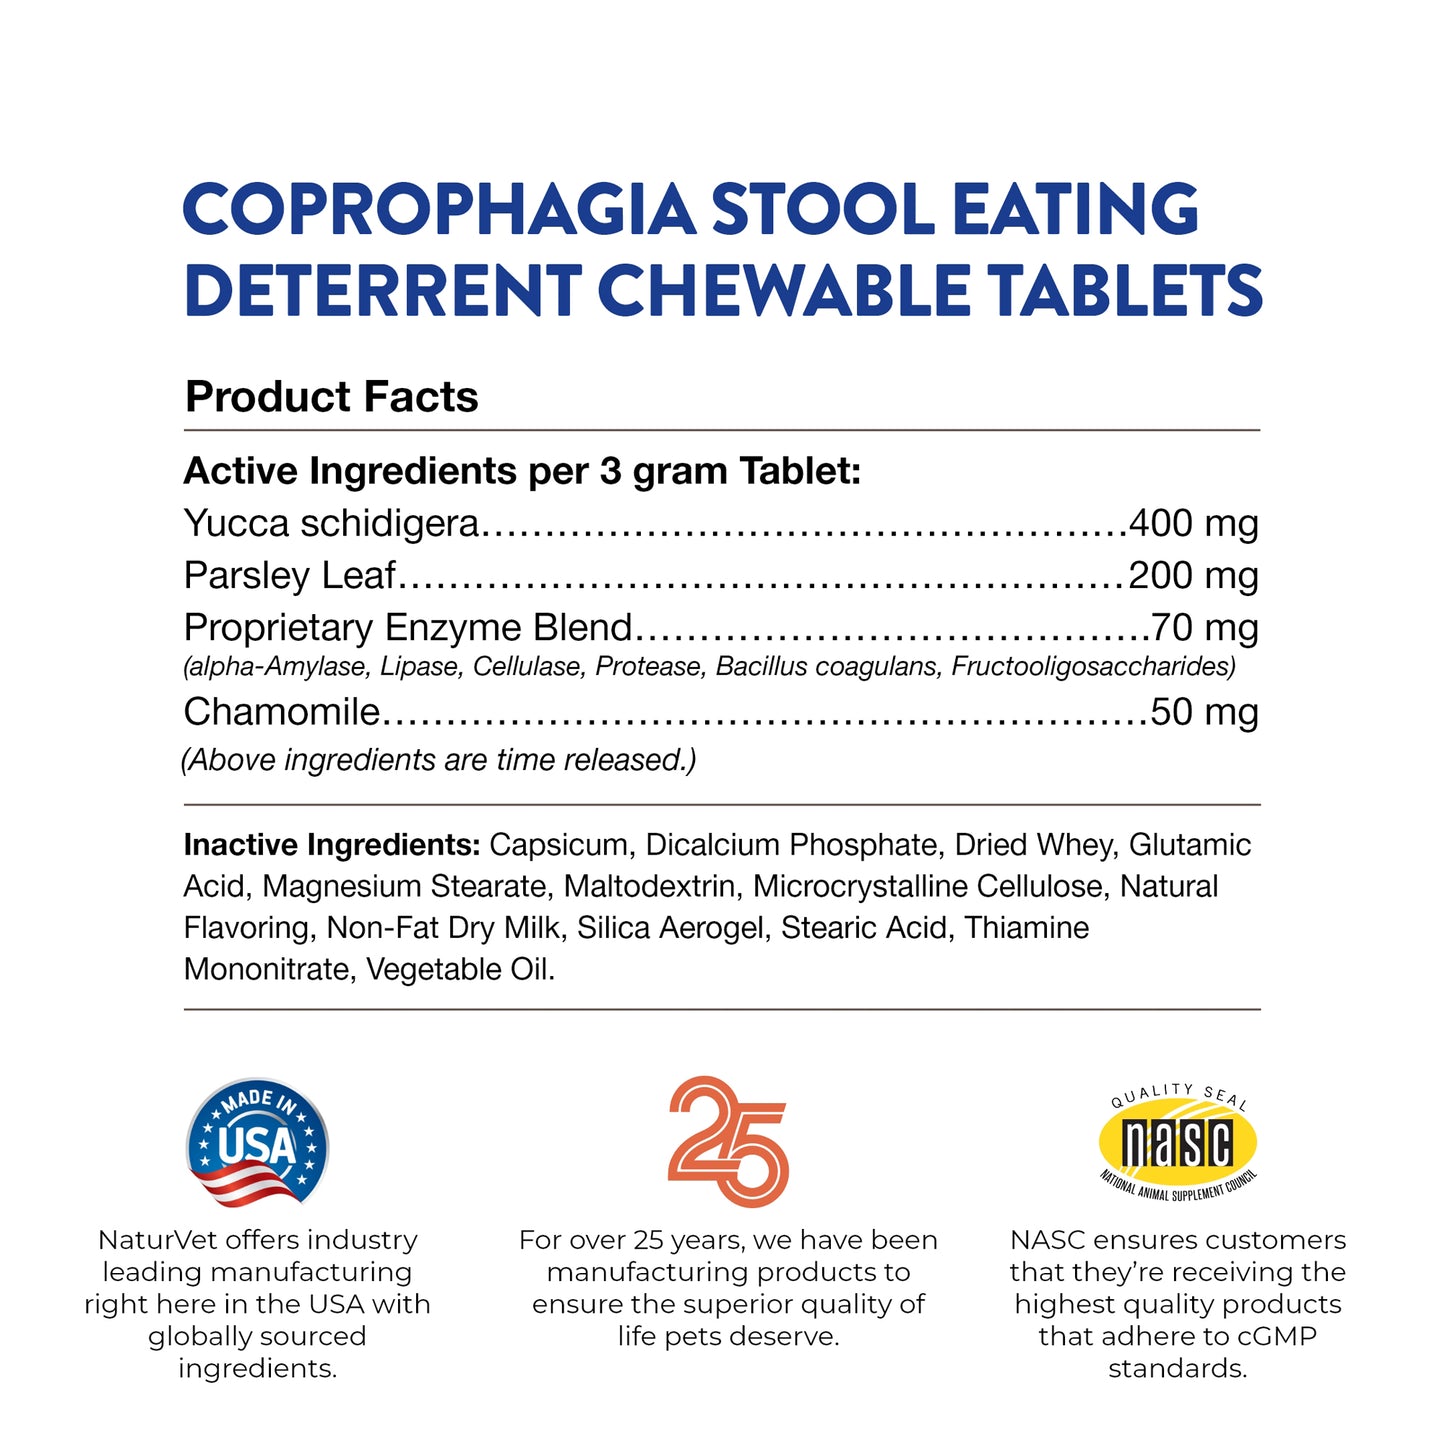 Coprophagia Stool Eating Deterrent Chewable Tablets